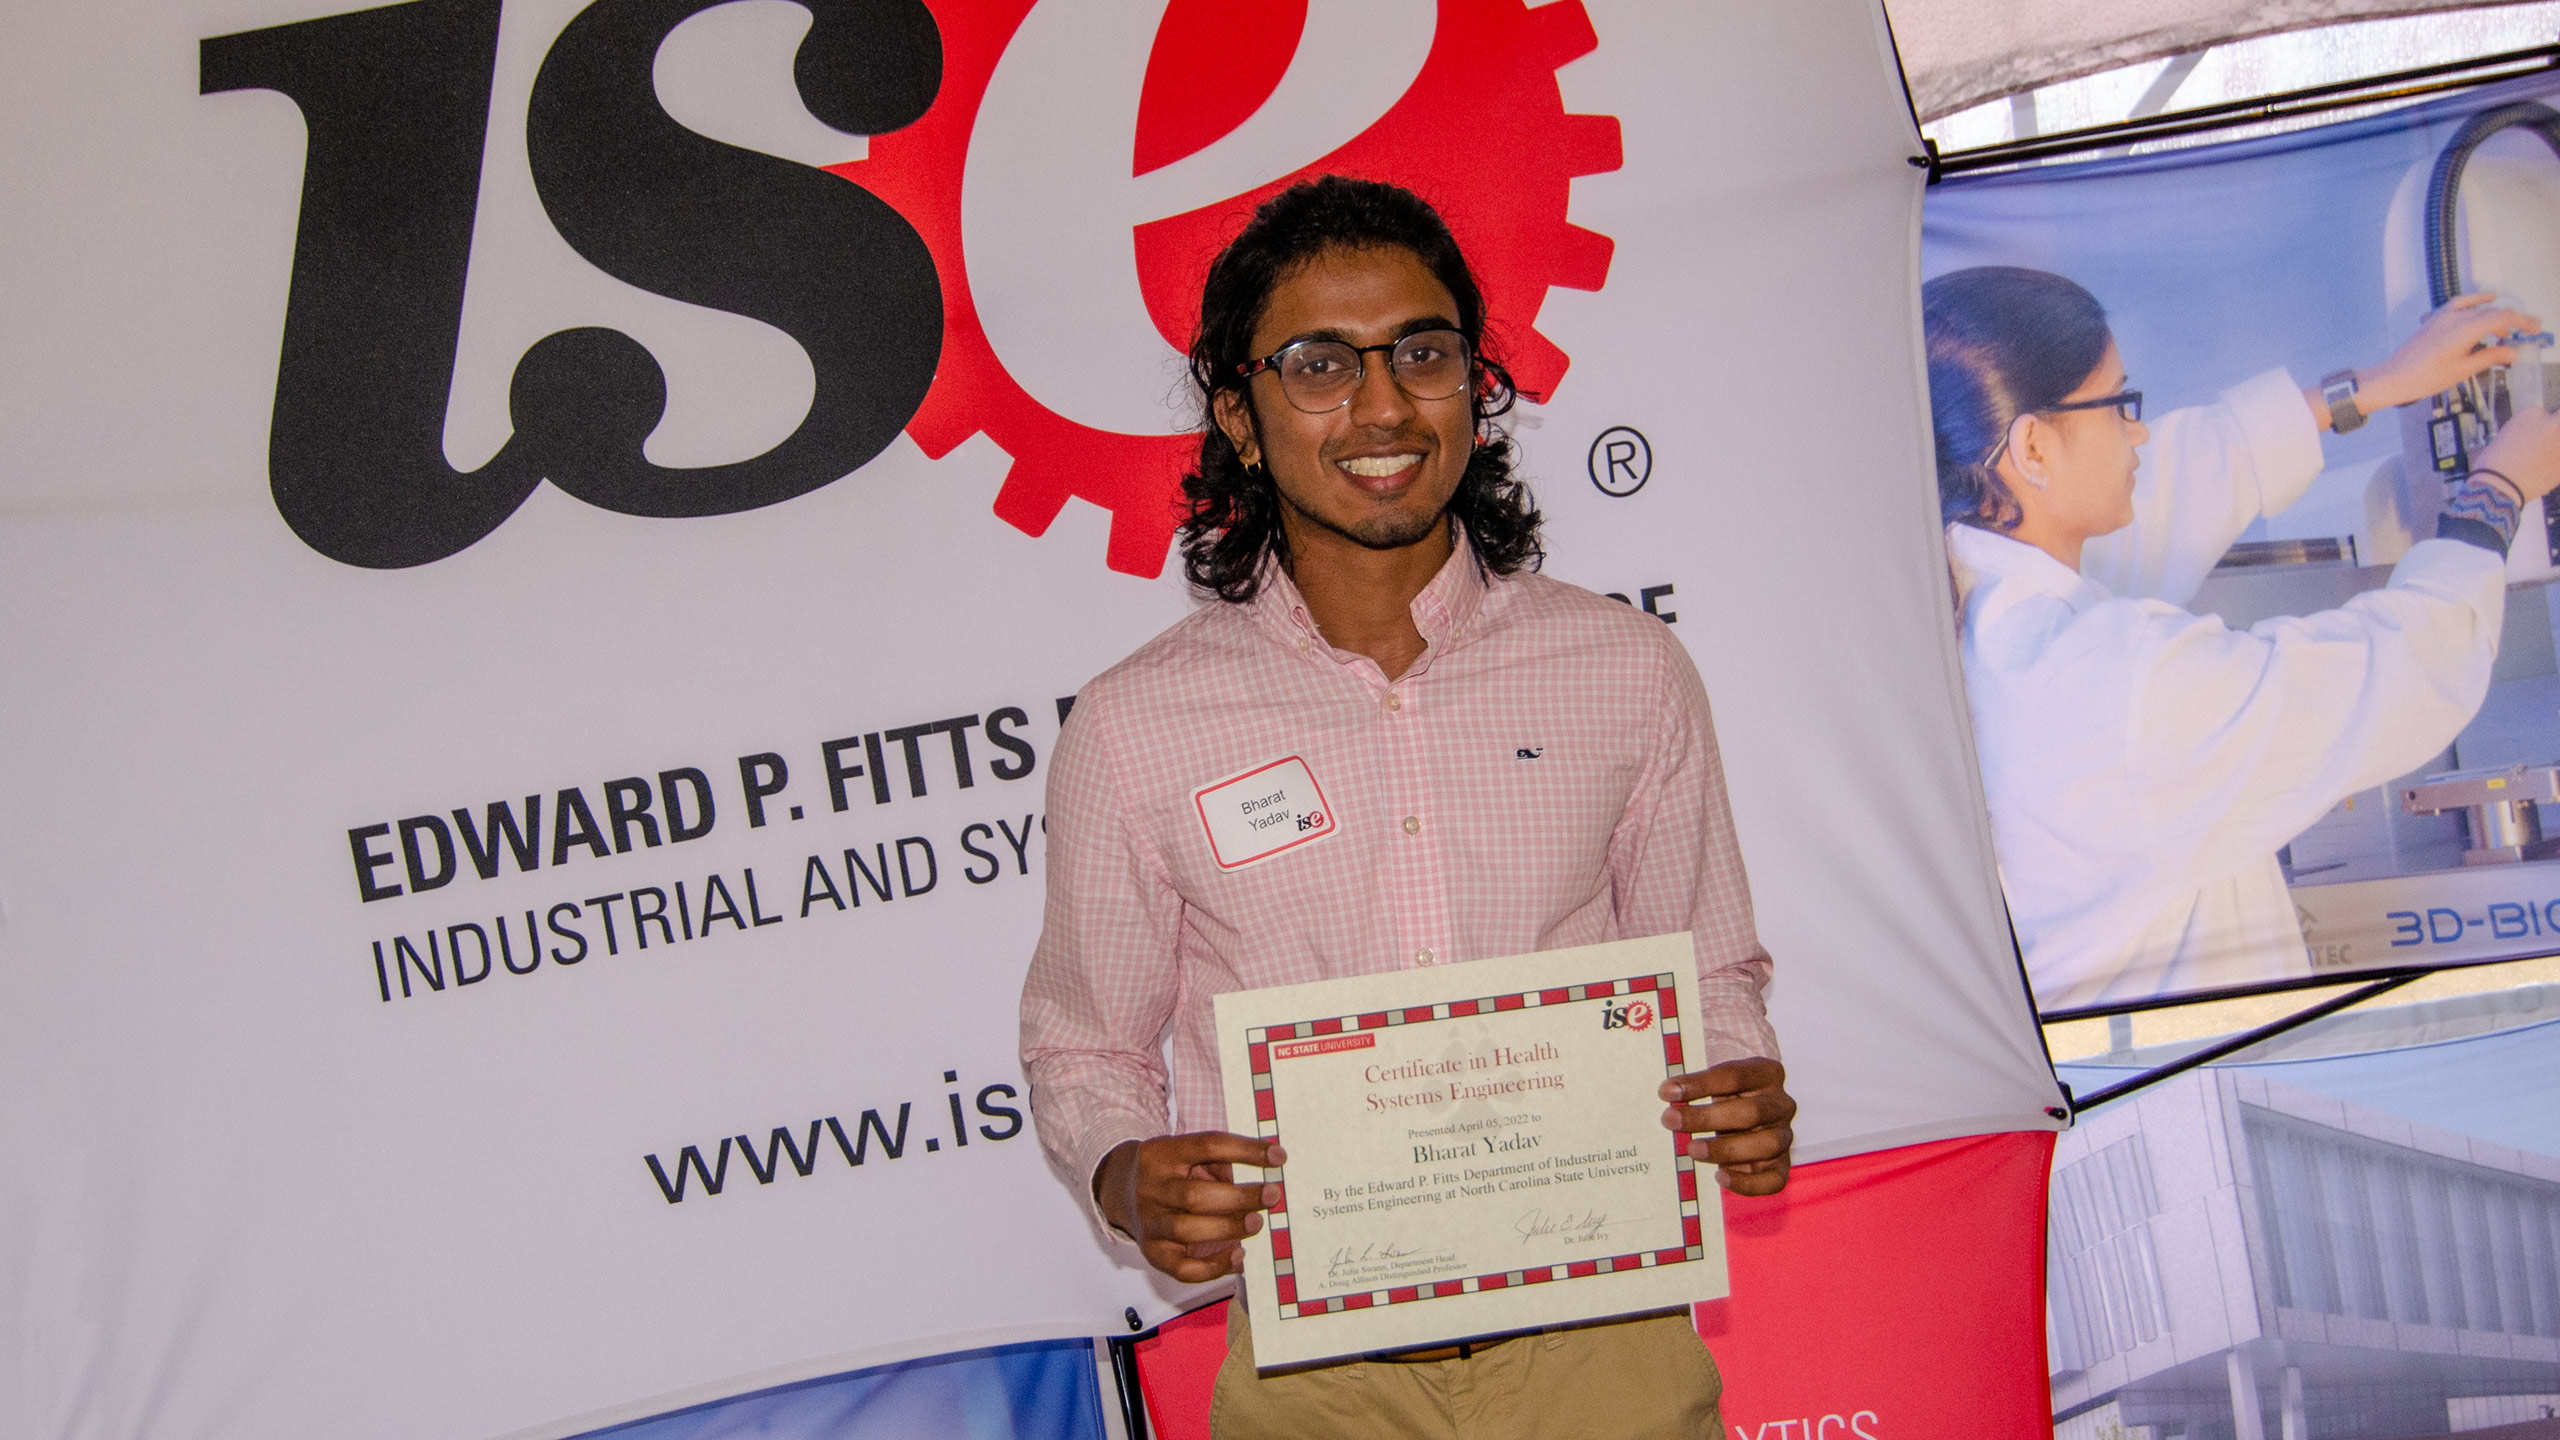 Bharat Yadav receiving his Healthcare Systems Engineering Certificate at the 2022 C.A. Anderson Awards